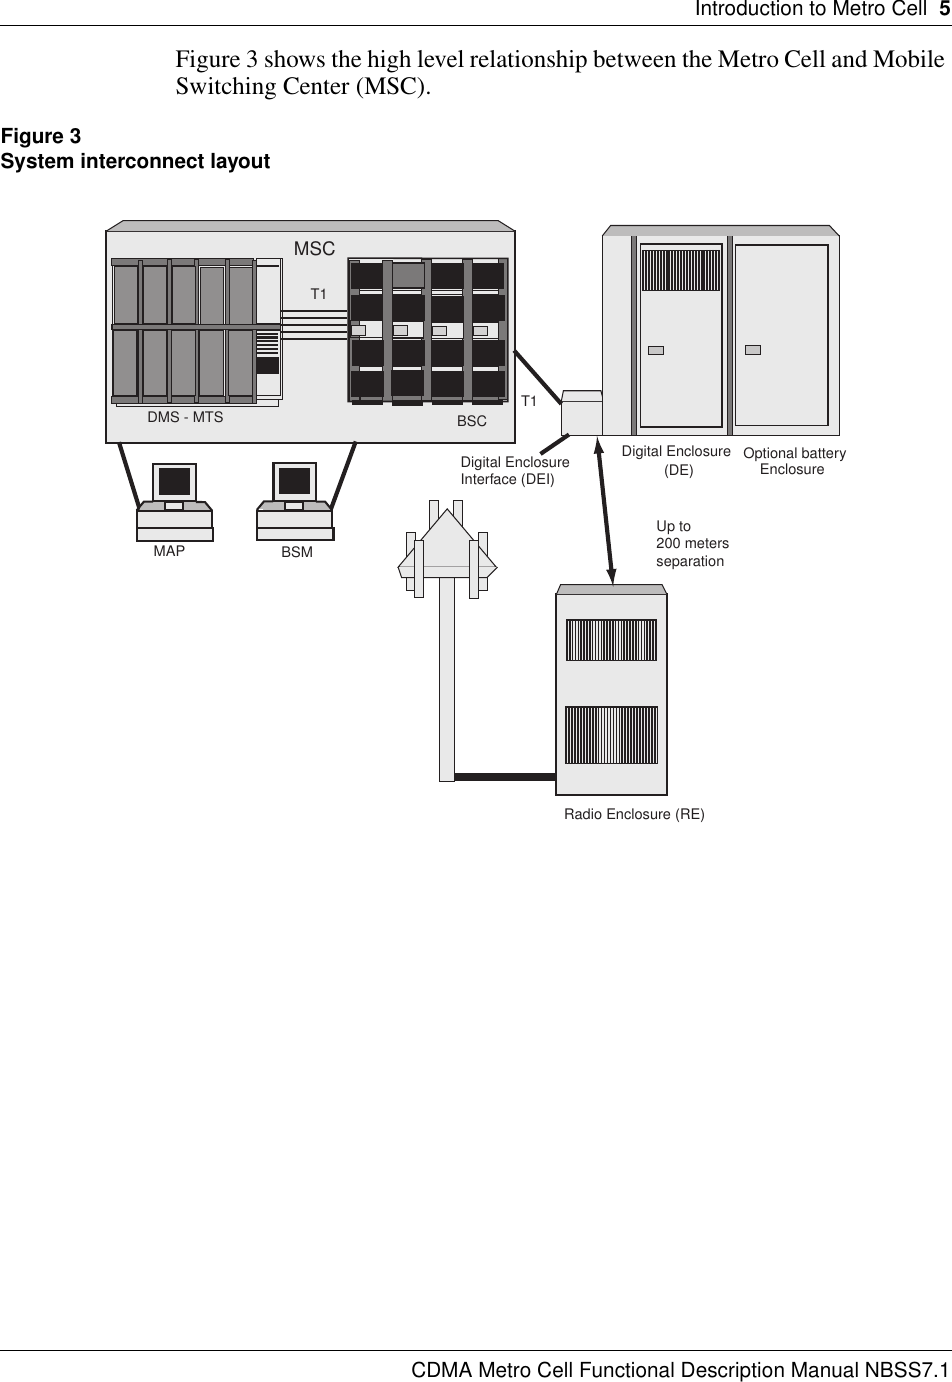 Introduction to Metro Cell  5CDMA Metro Cell Functional Description Manual NBSS7.1Figure 3 shows the high level relationship between the Metro Cell and Mobile Switching Center (MSC).Figure 3System interconnect layoutDigital Enclosure(DE) Optional batteryDigital EnclosureInterface (DEI)DMS - MTSMSCBSCT1T1EnclosureUp to200 metersseparationRadio Enclosure (RE)MAP BSM